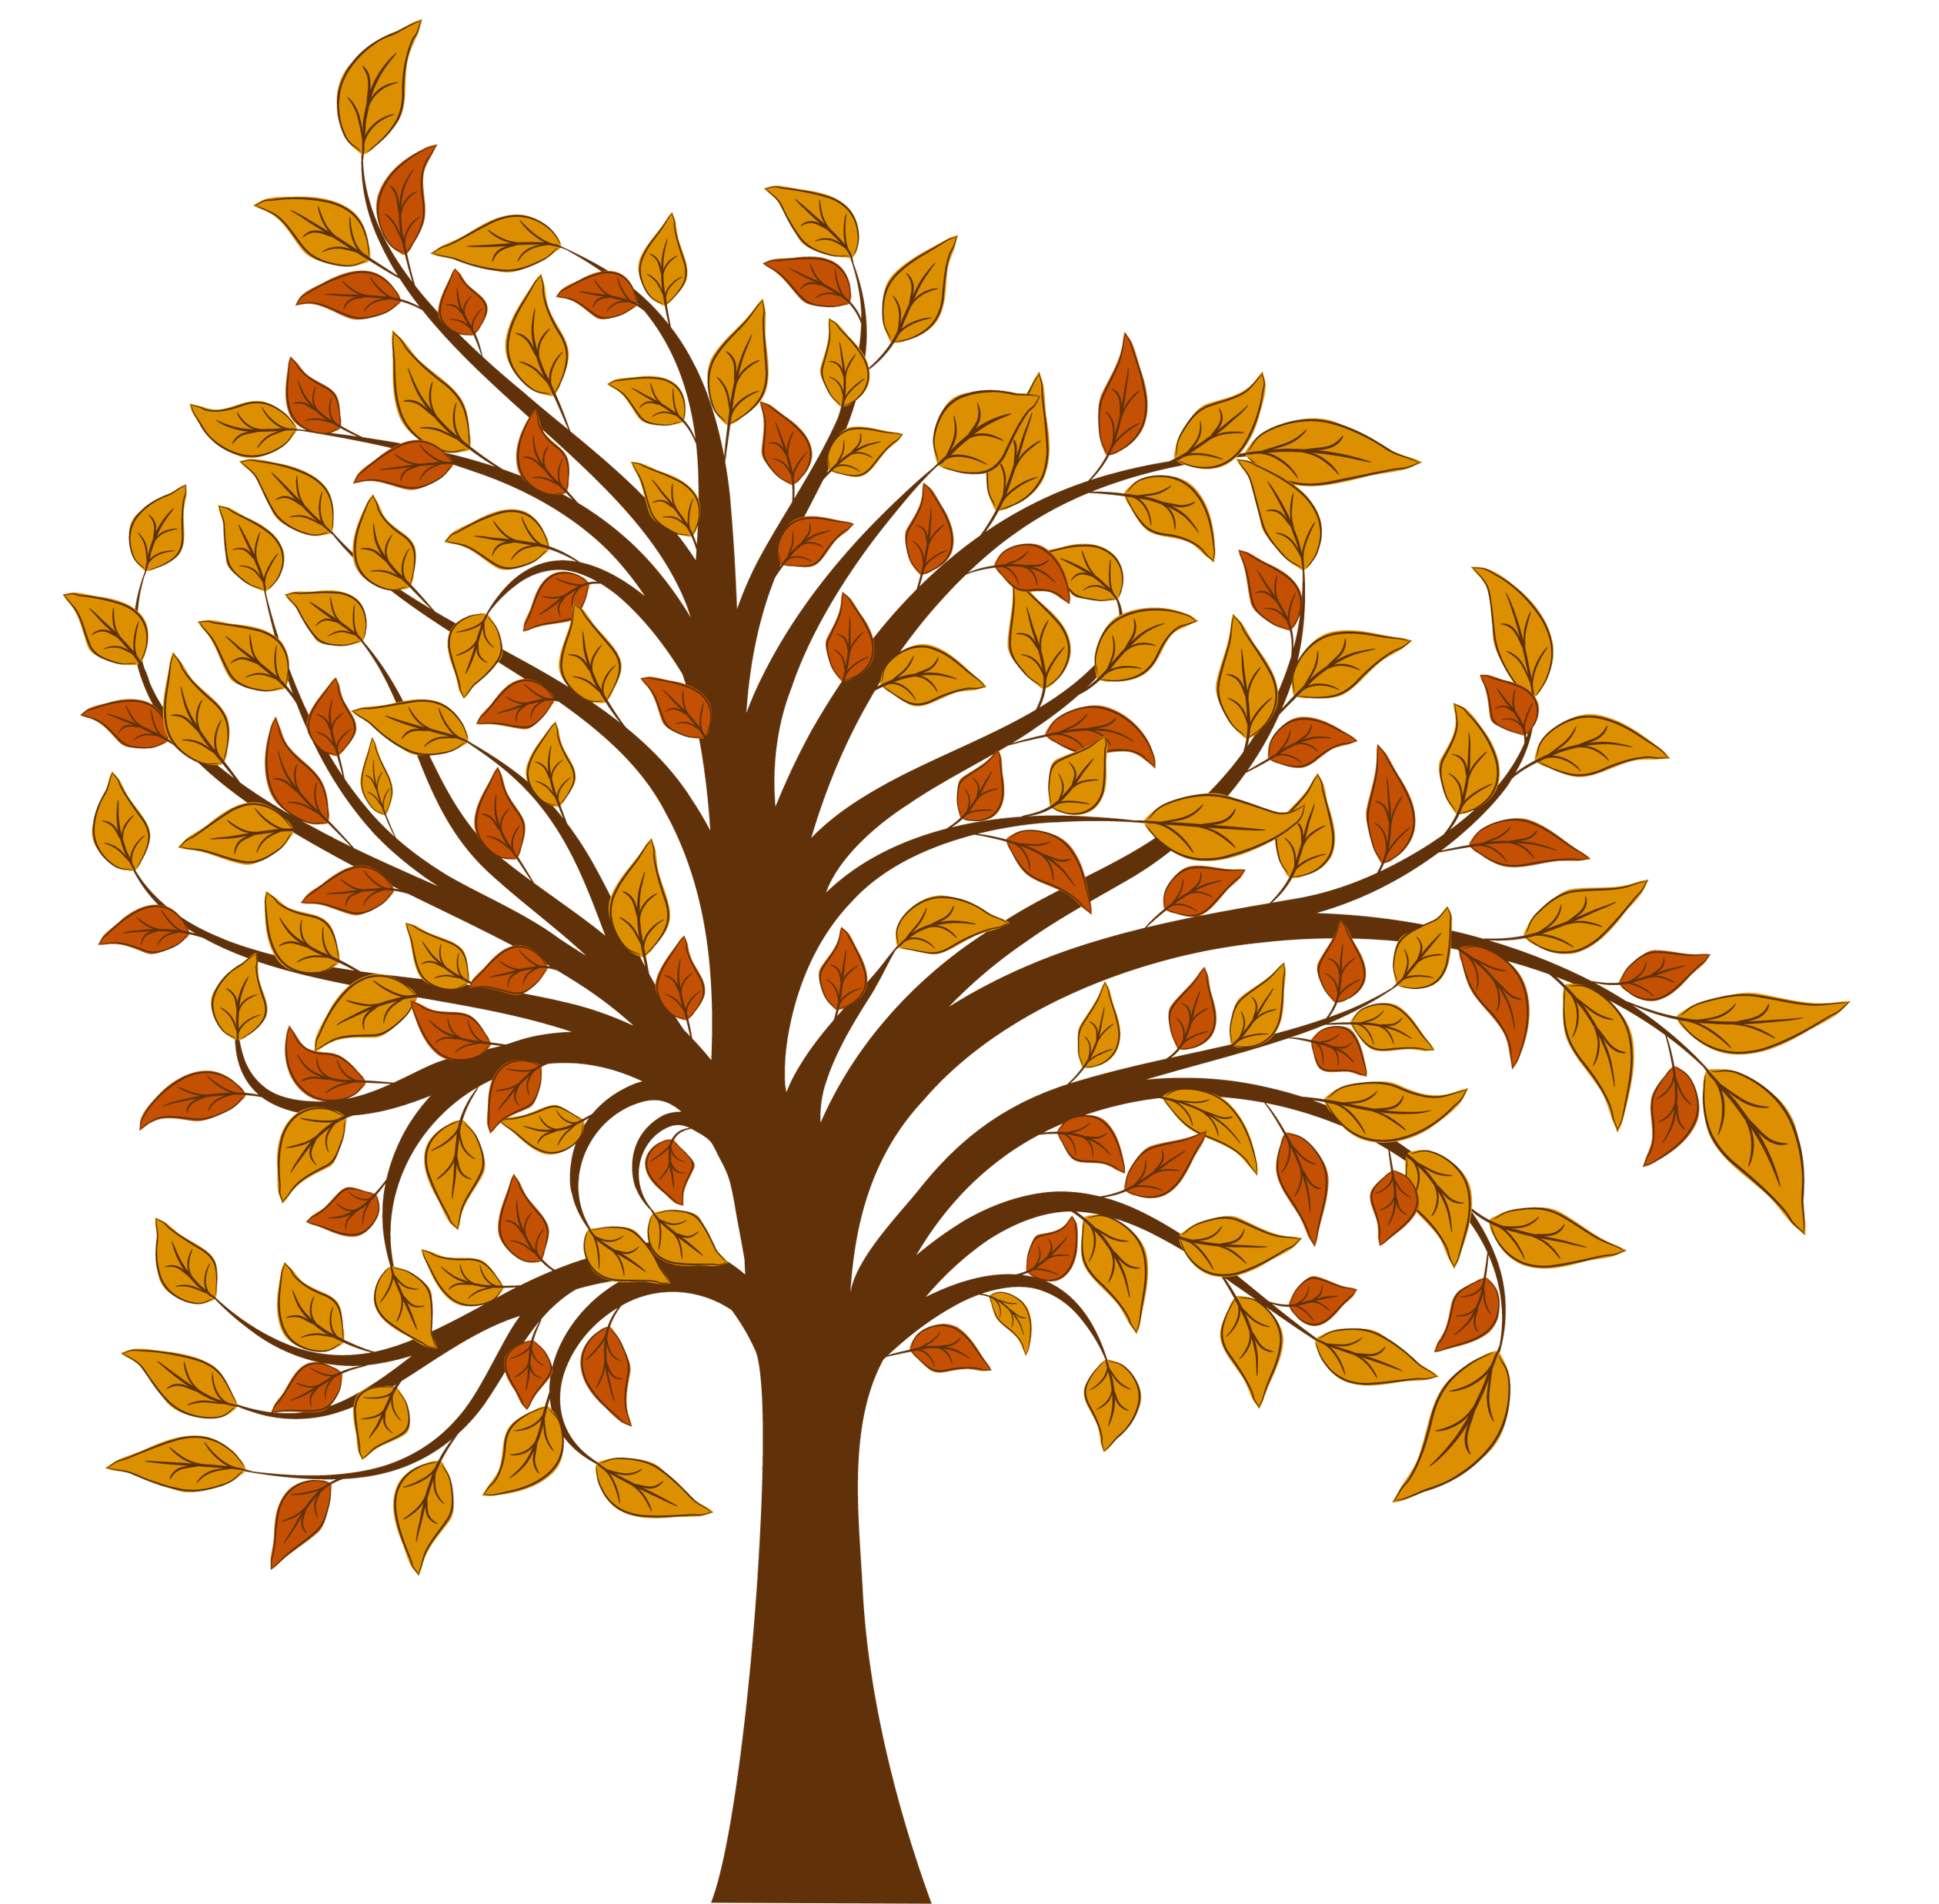 Fall Tree Clipart Png 